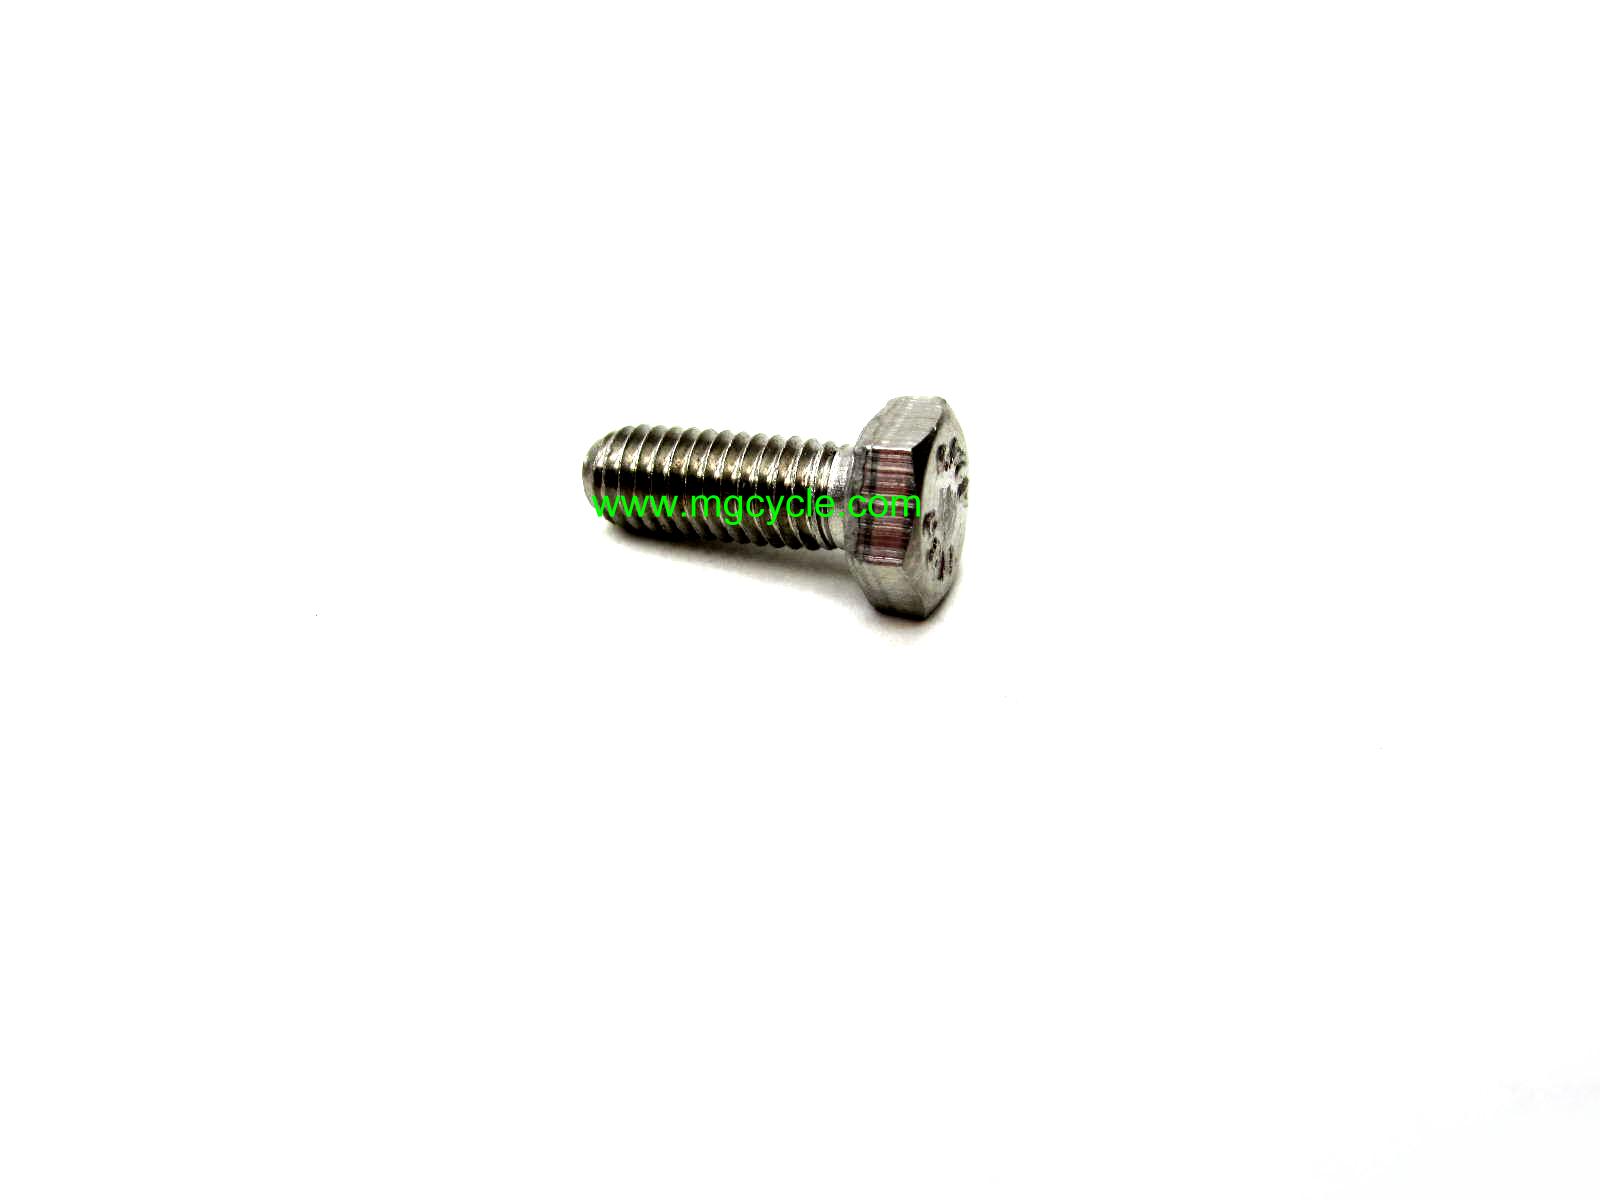 6mm bolt 16mm long, stainless steel - Click Image to Close